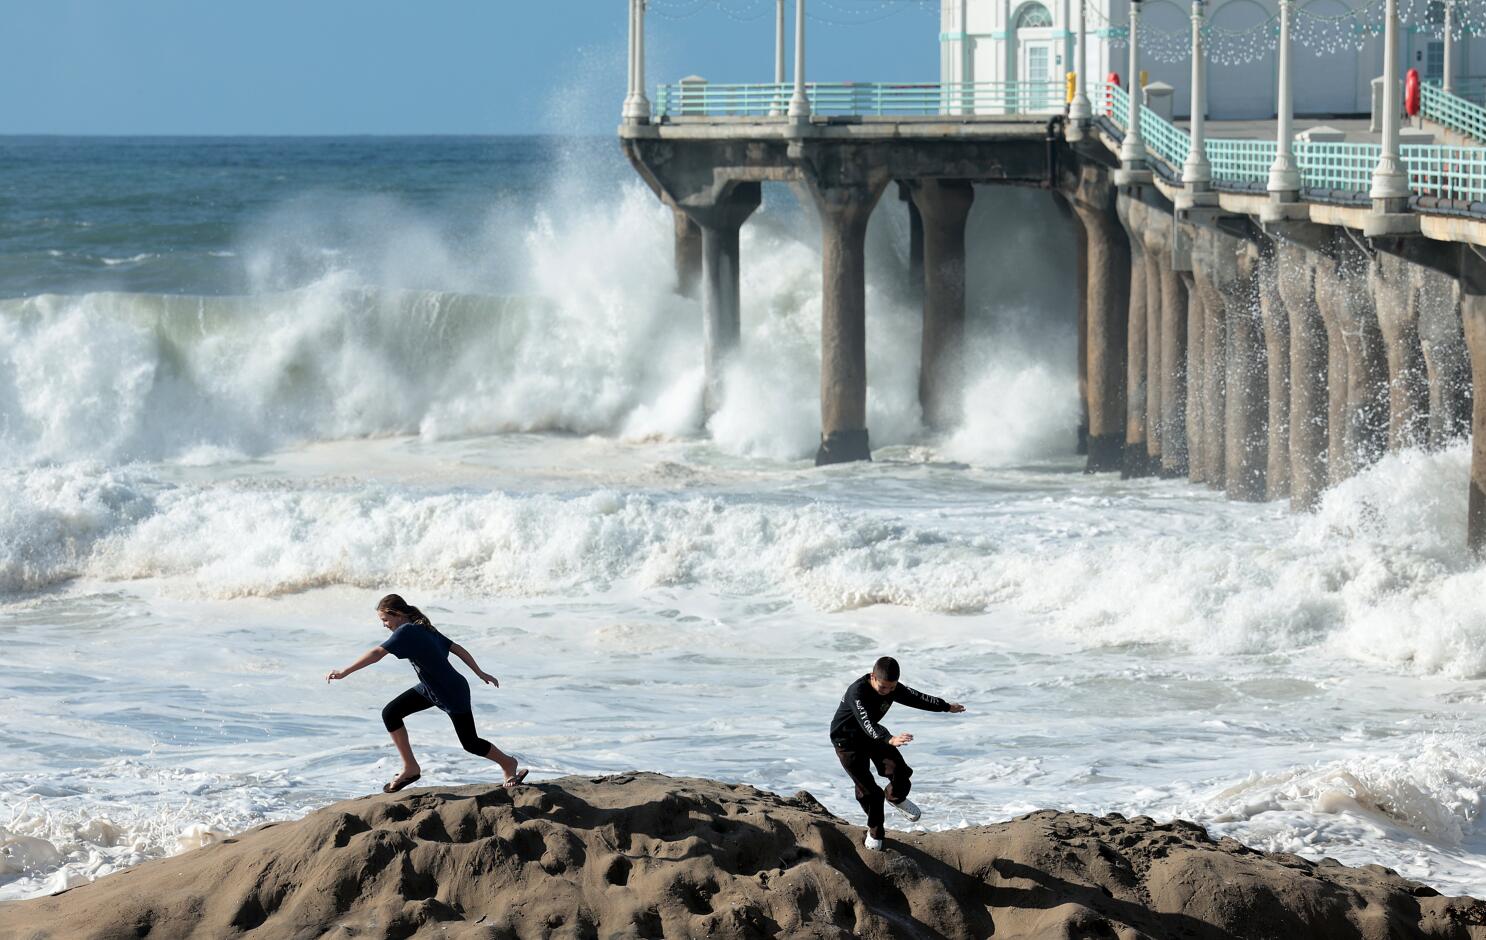 New storm renews wave warnings after Pismo Beach tourist death